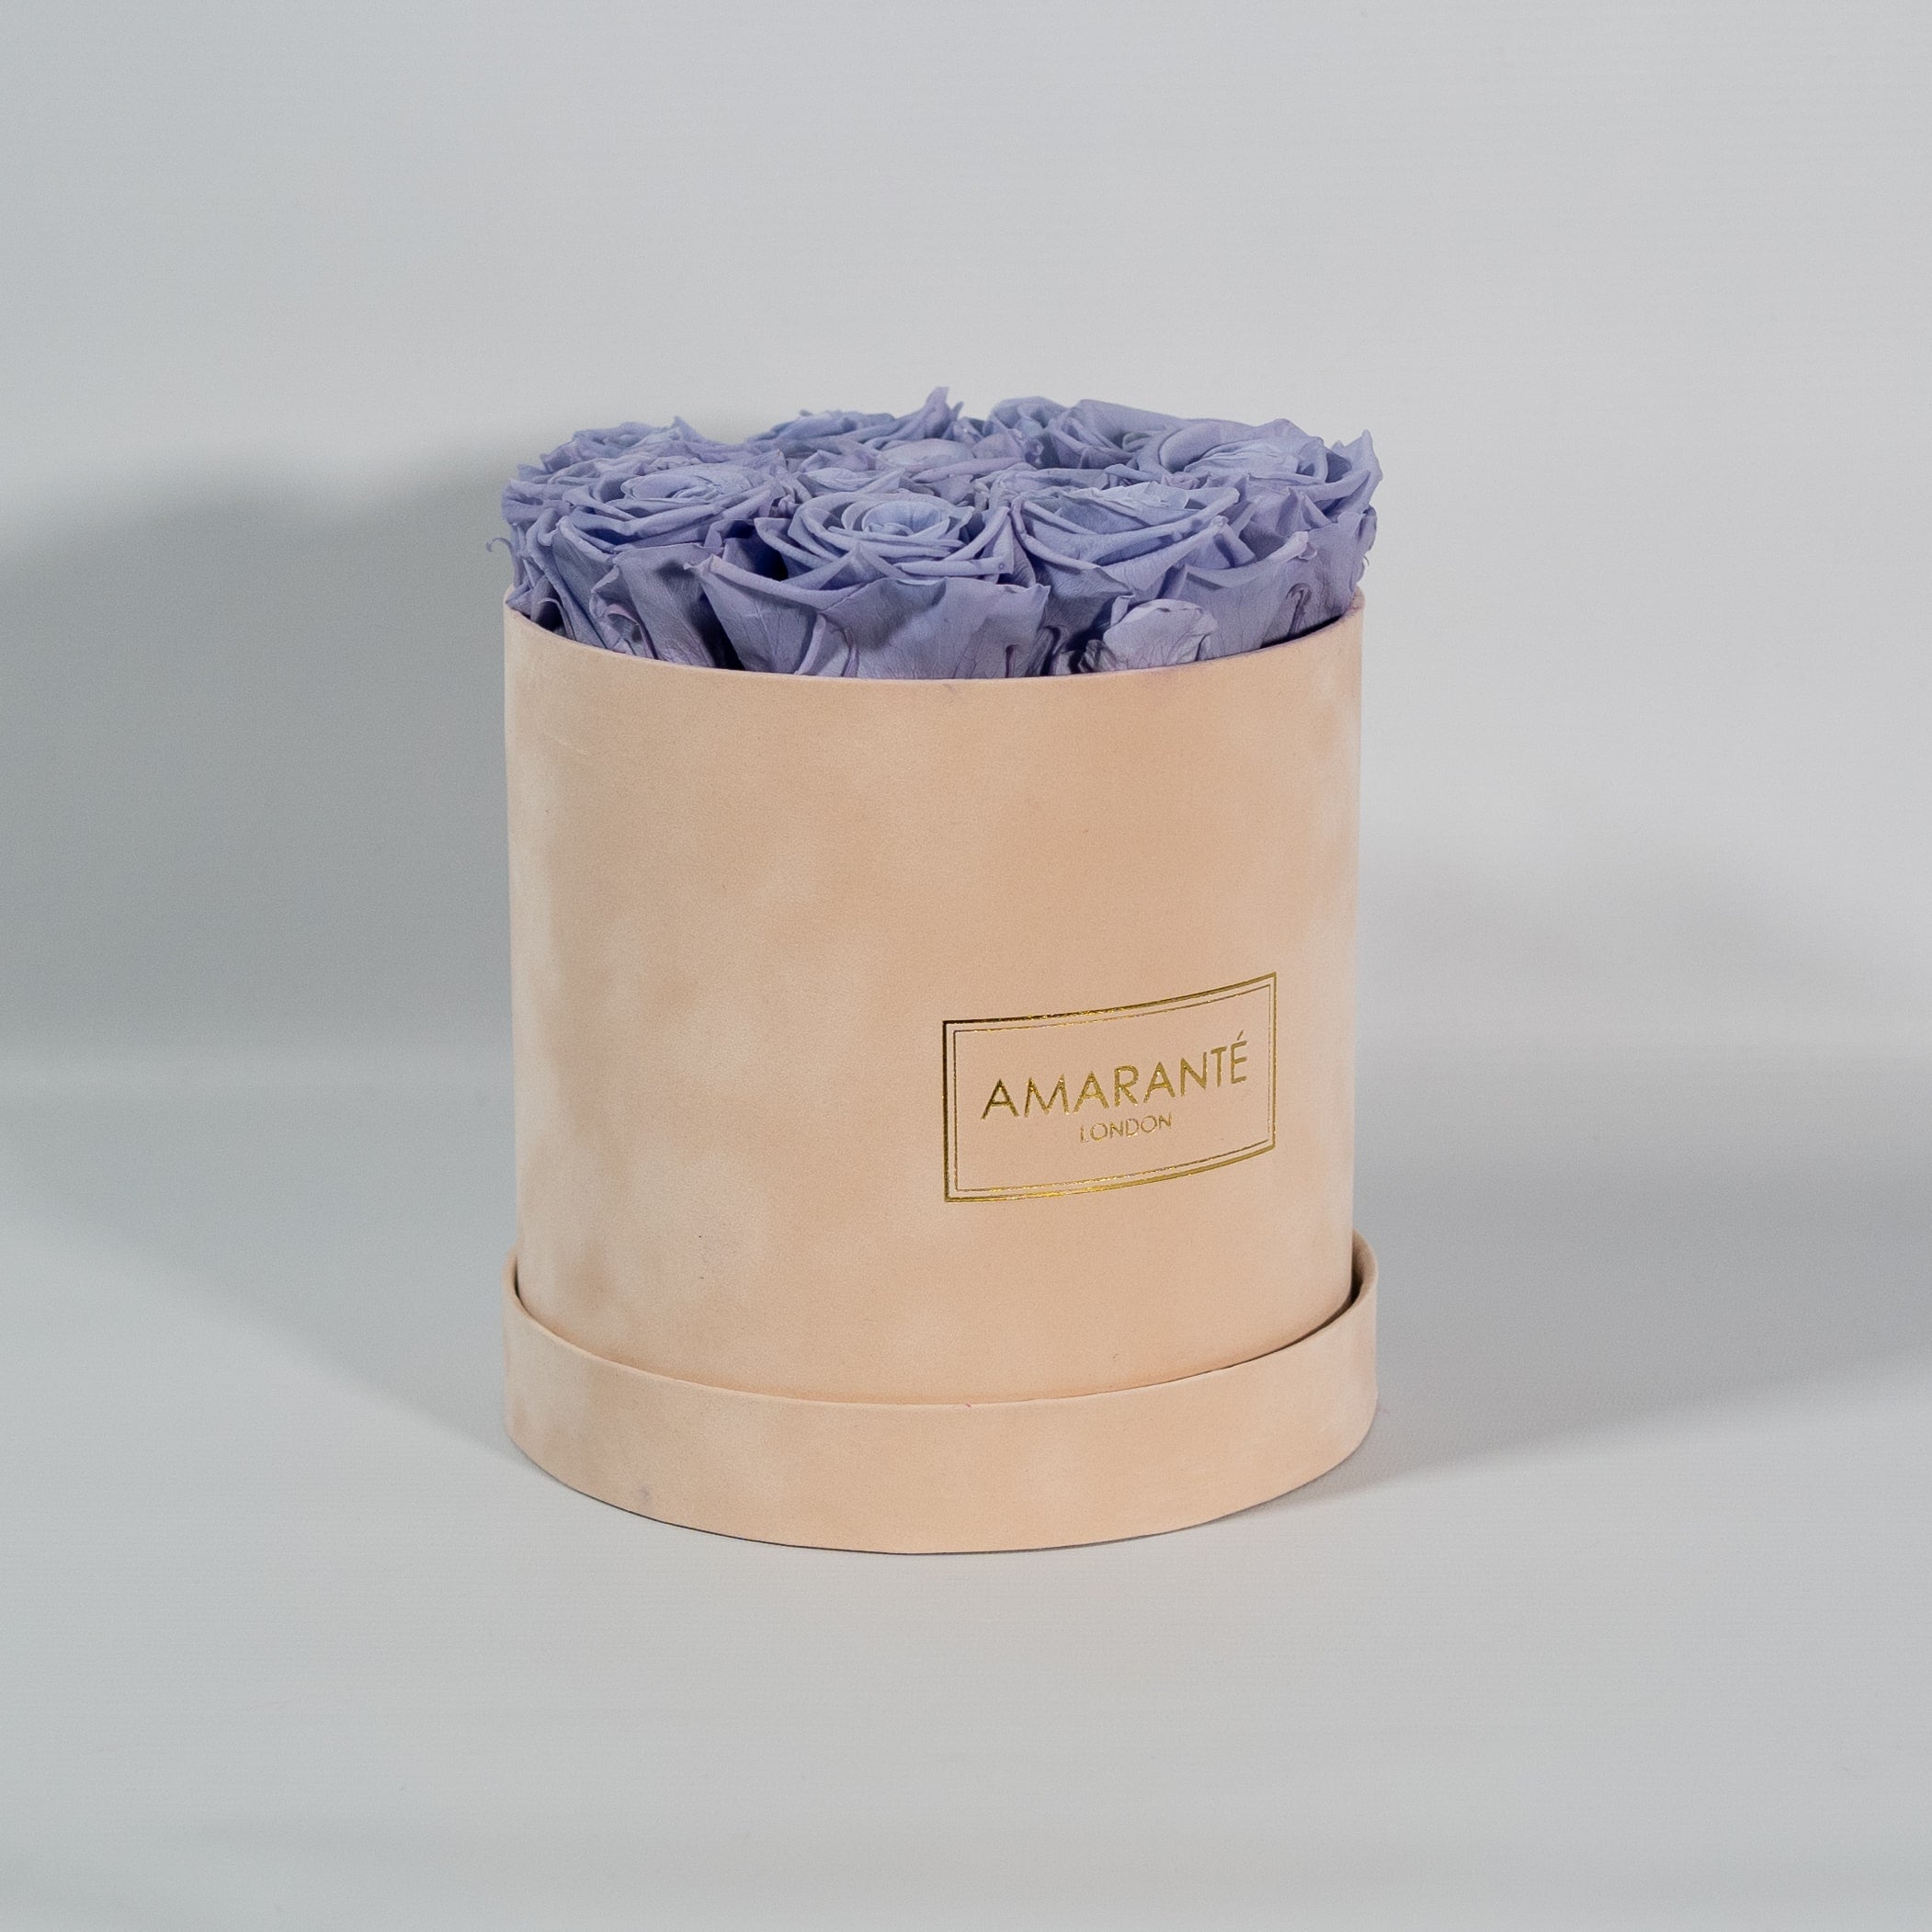 Spring inspired lavender roses imbedded in a stylish beige box. 